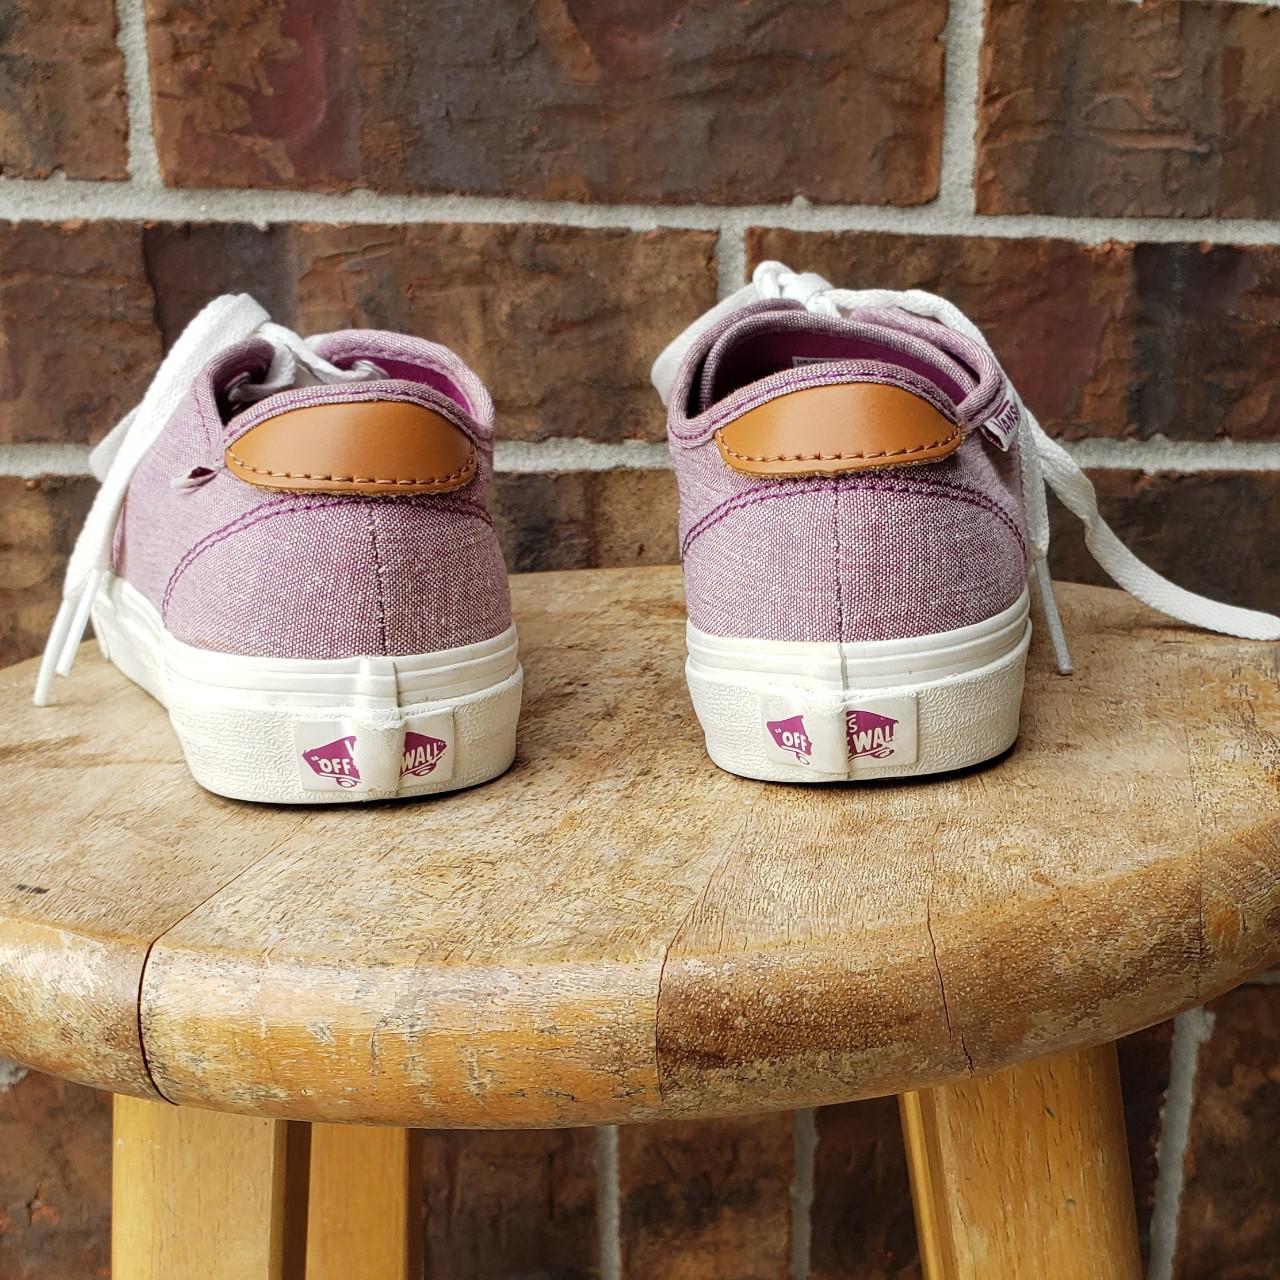 Product Image 3 - Vans Low Tops

♤ purple lowtops